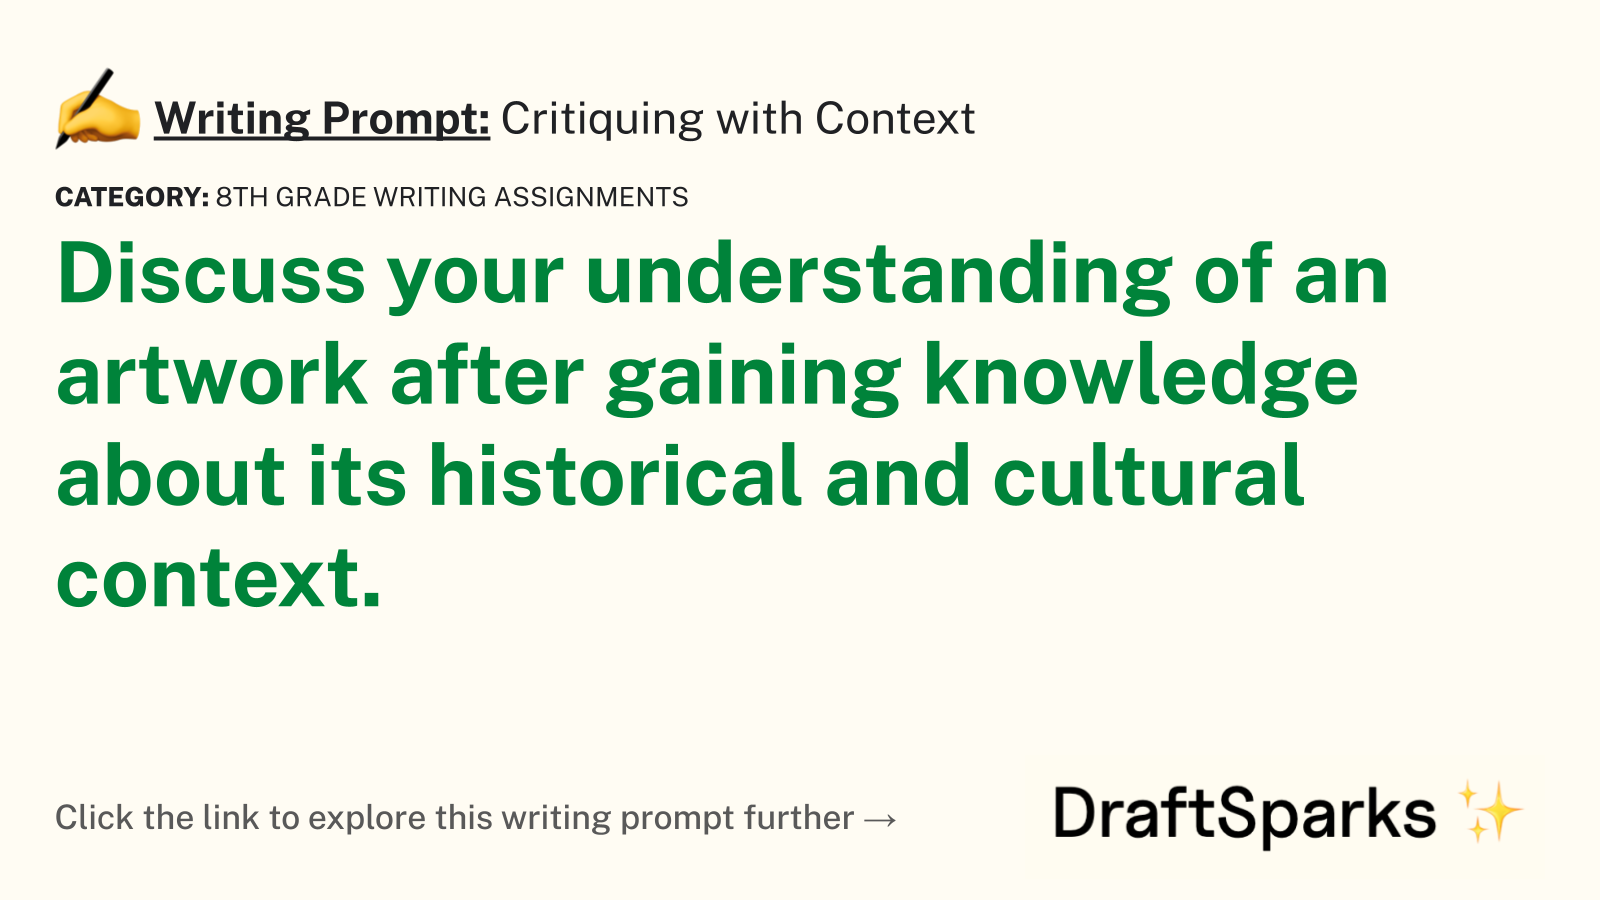 Critiquing with Context